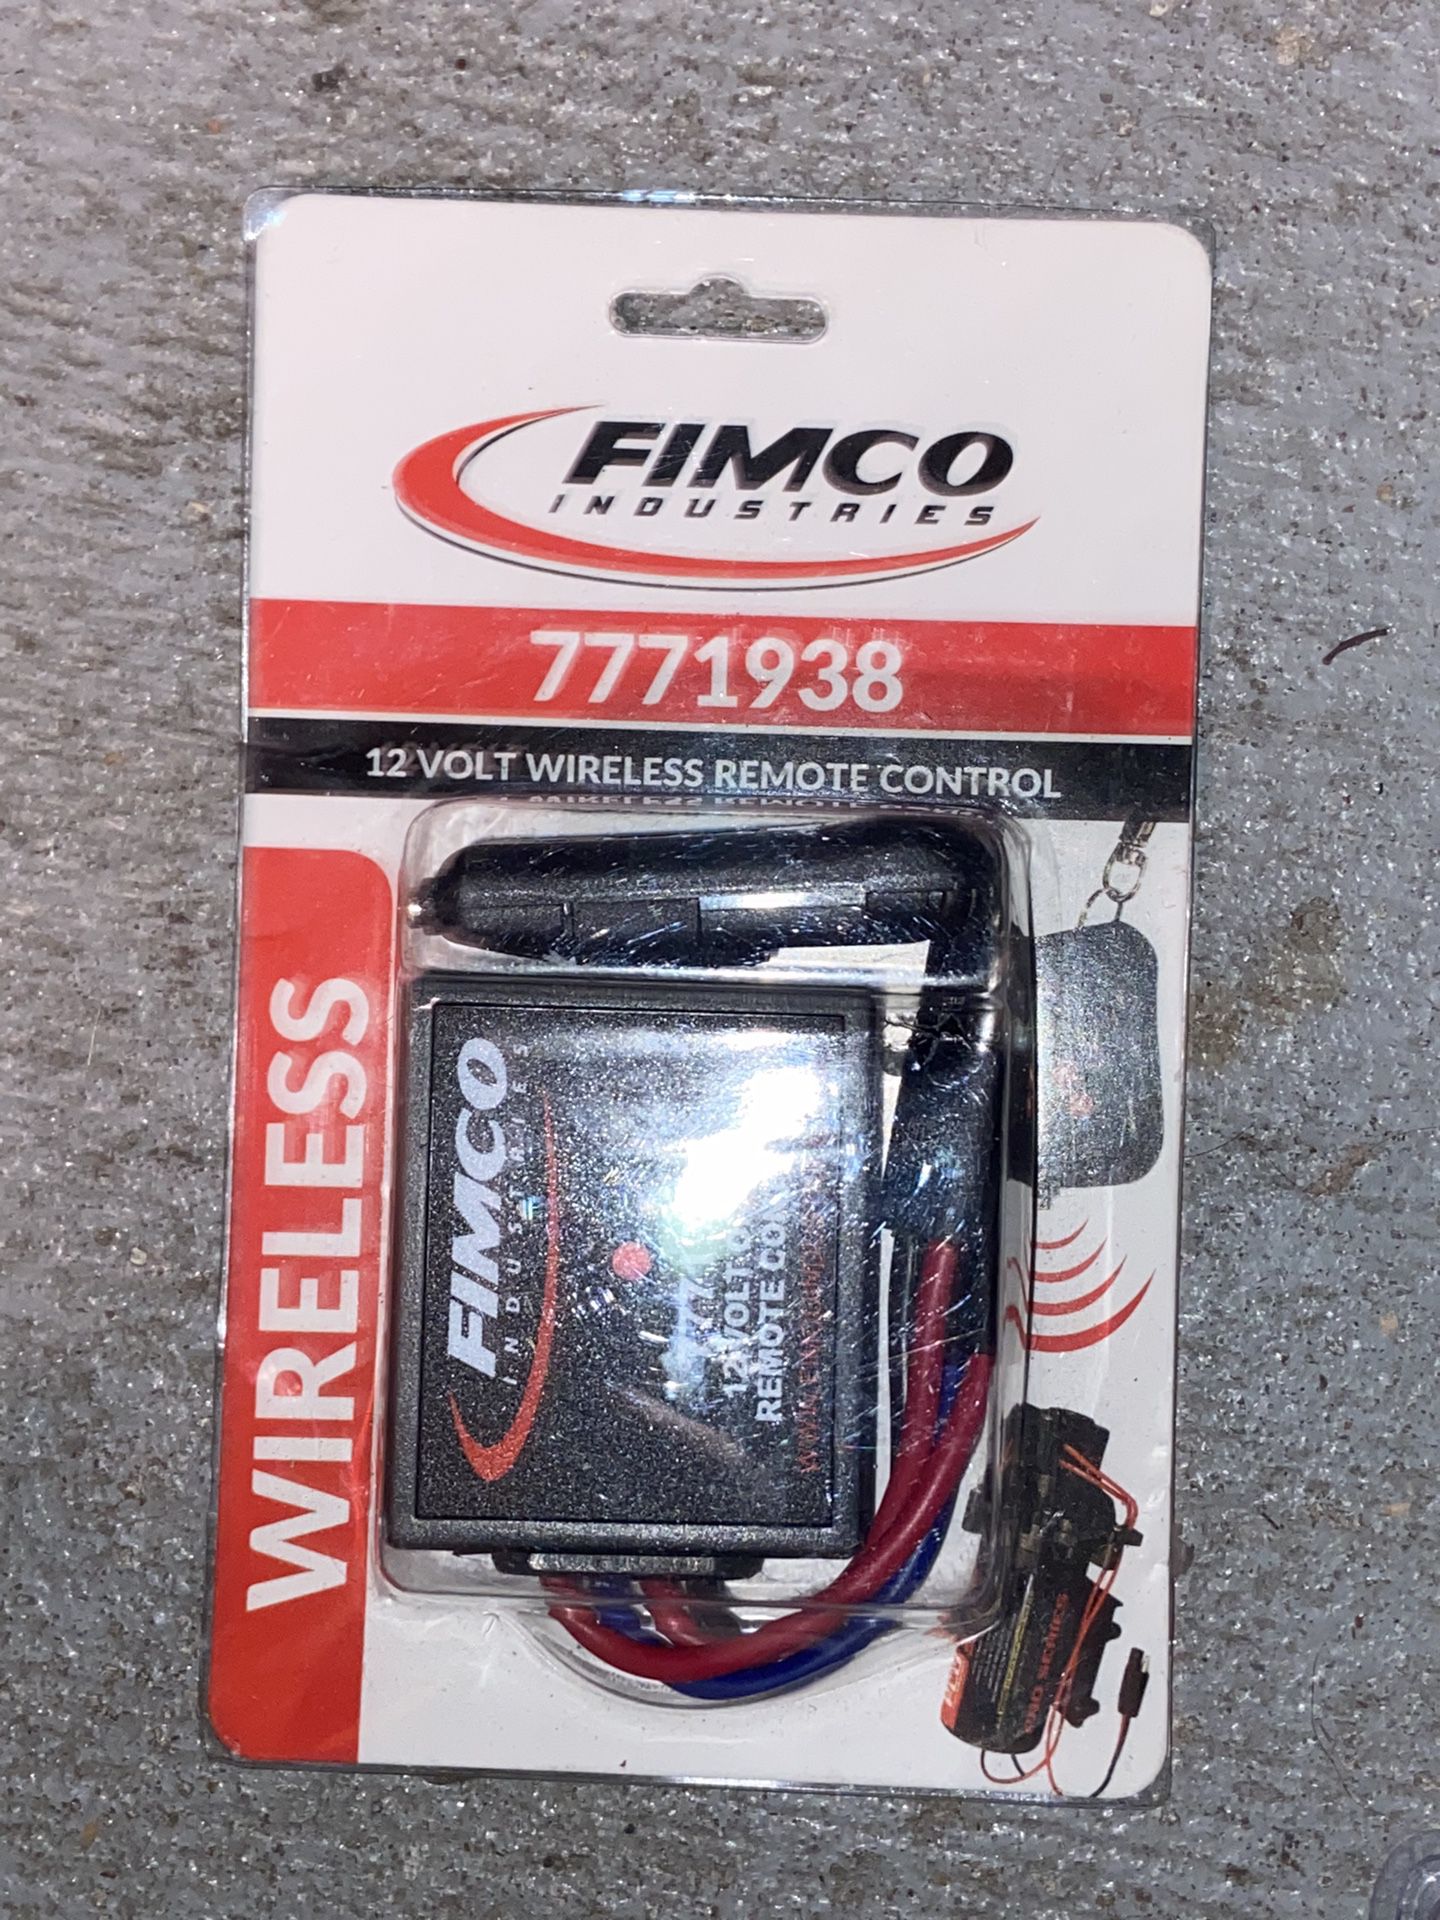 Fimco 12V Wireless Remote On/Off Switch at Tractor Supply Co.